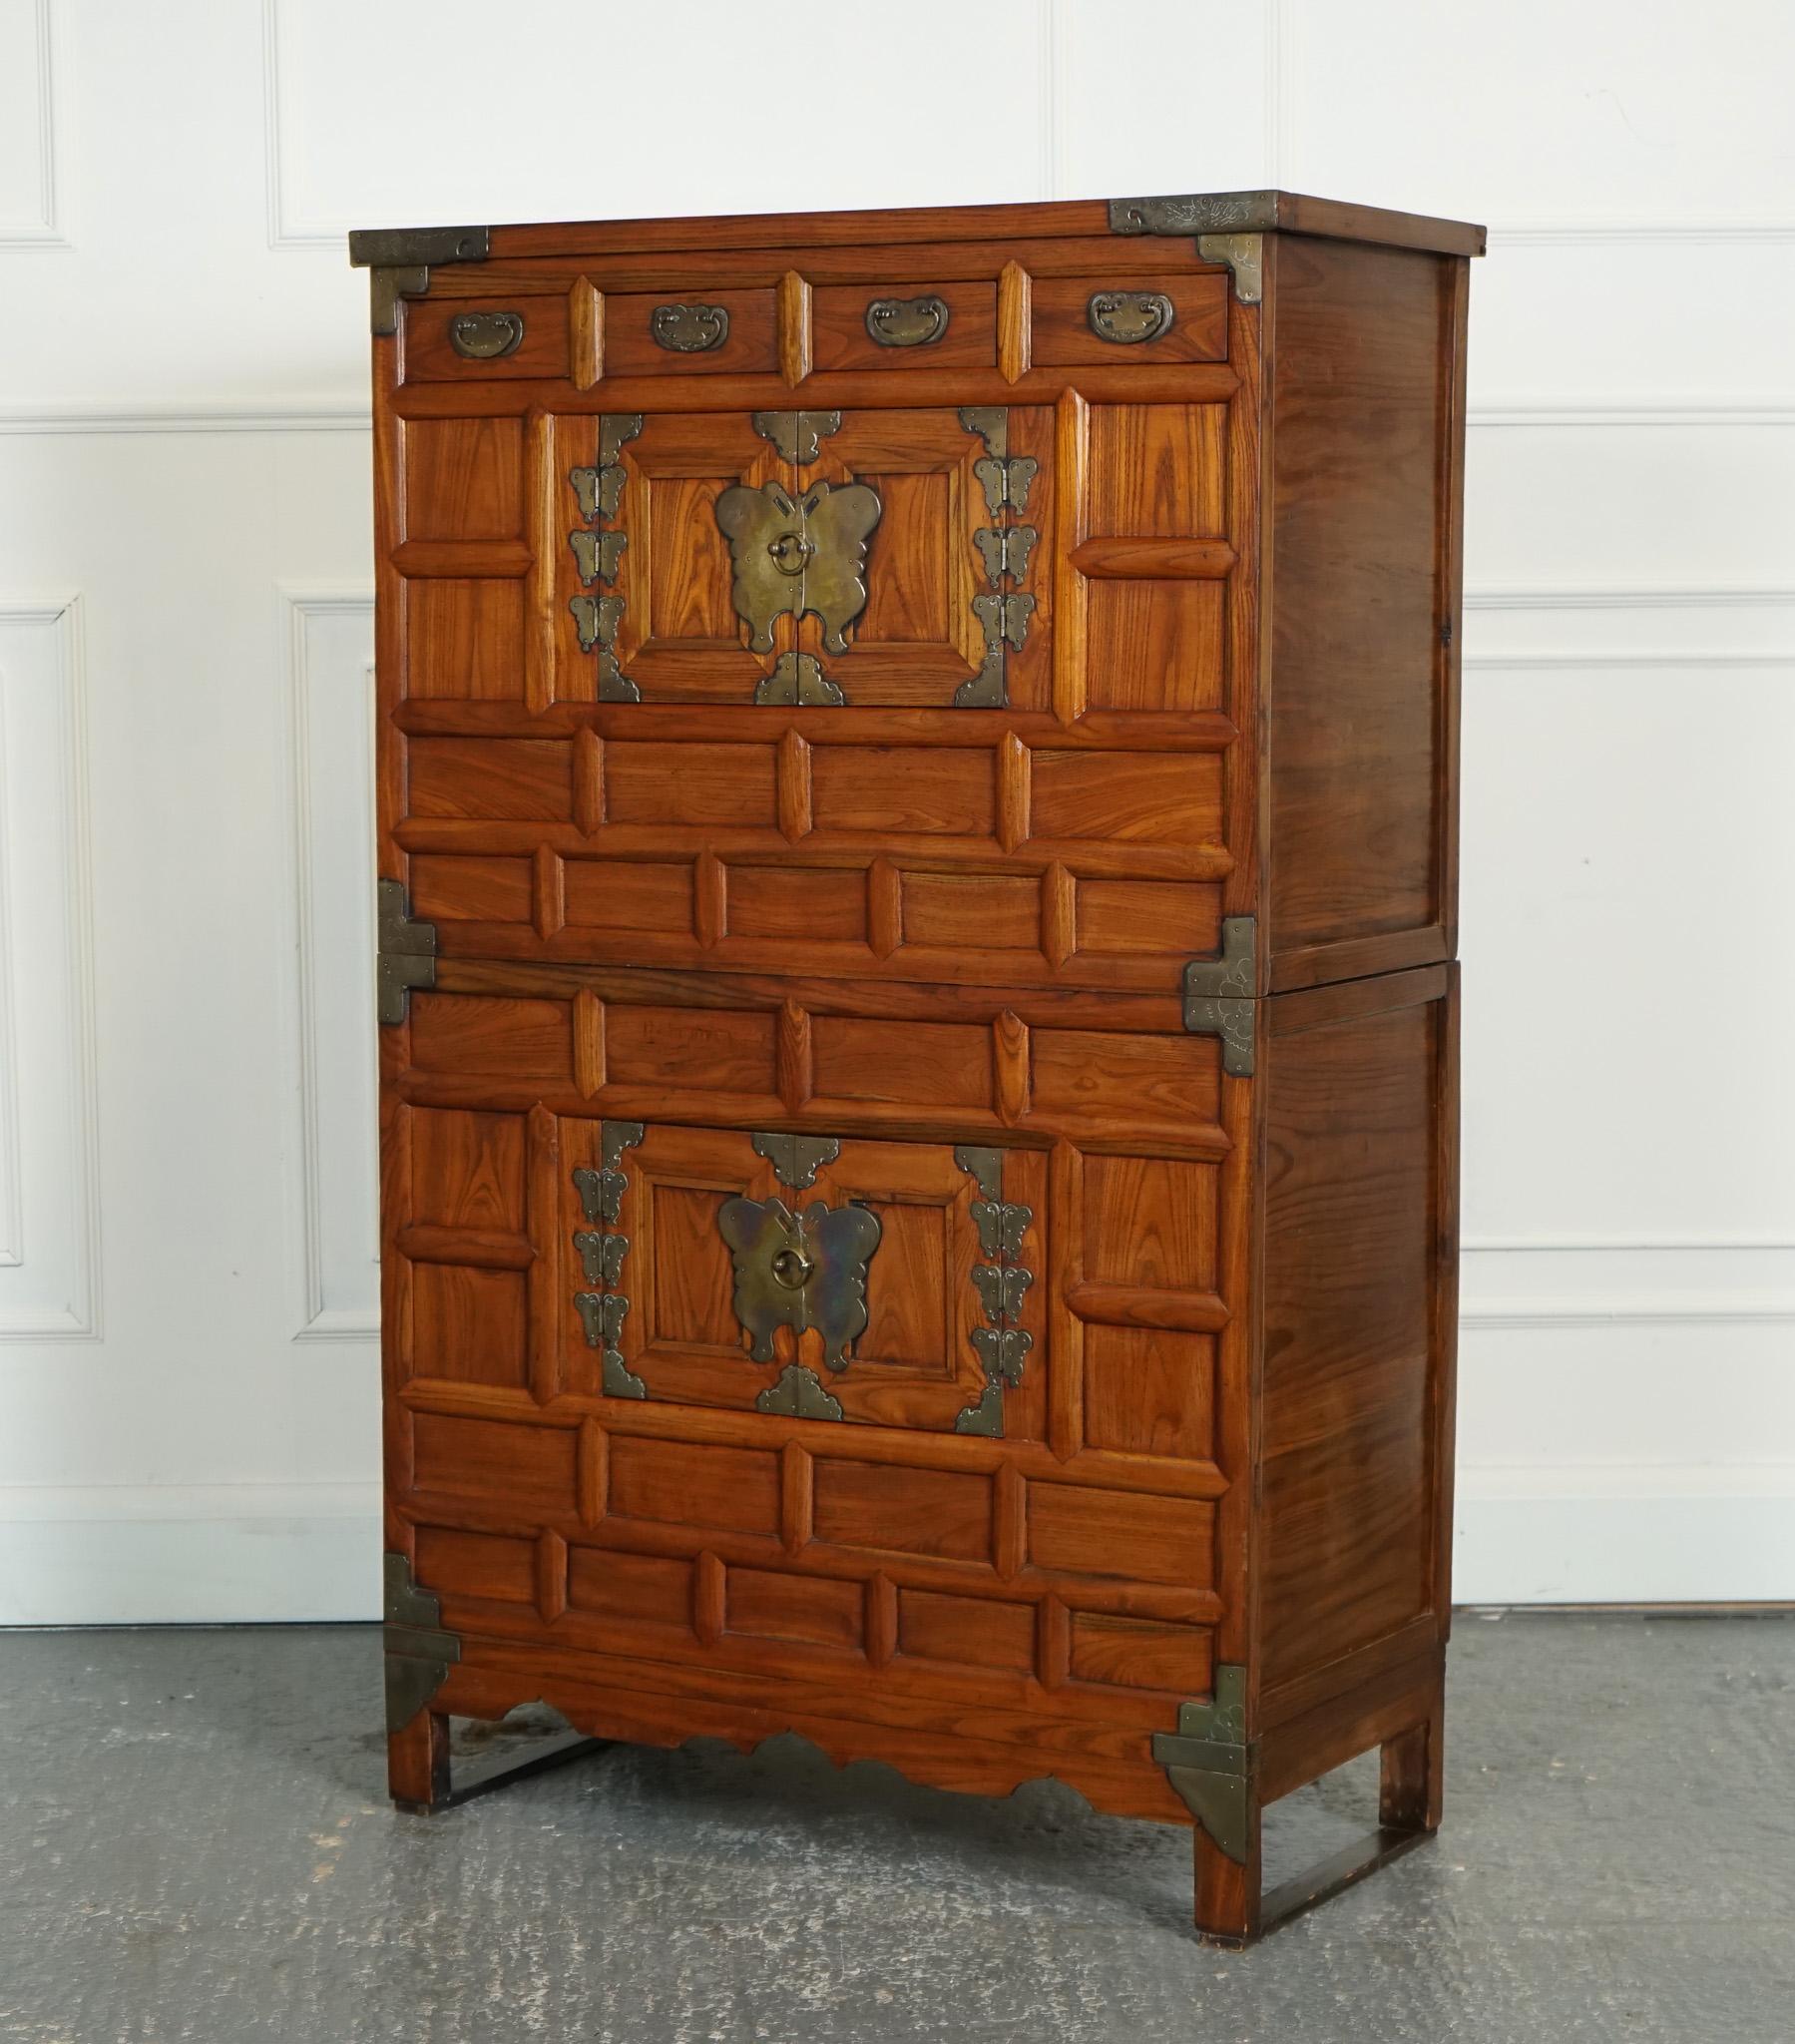 Antiques of London



We are delighted to offer for sale this Late 19th Century Korean Chest.

The late 19th-century Korean Ich'ung butterfly wedding cabinet chest with brass fittings is a truly exquisite piece that captures the essence of Korean